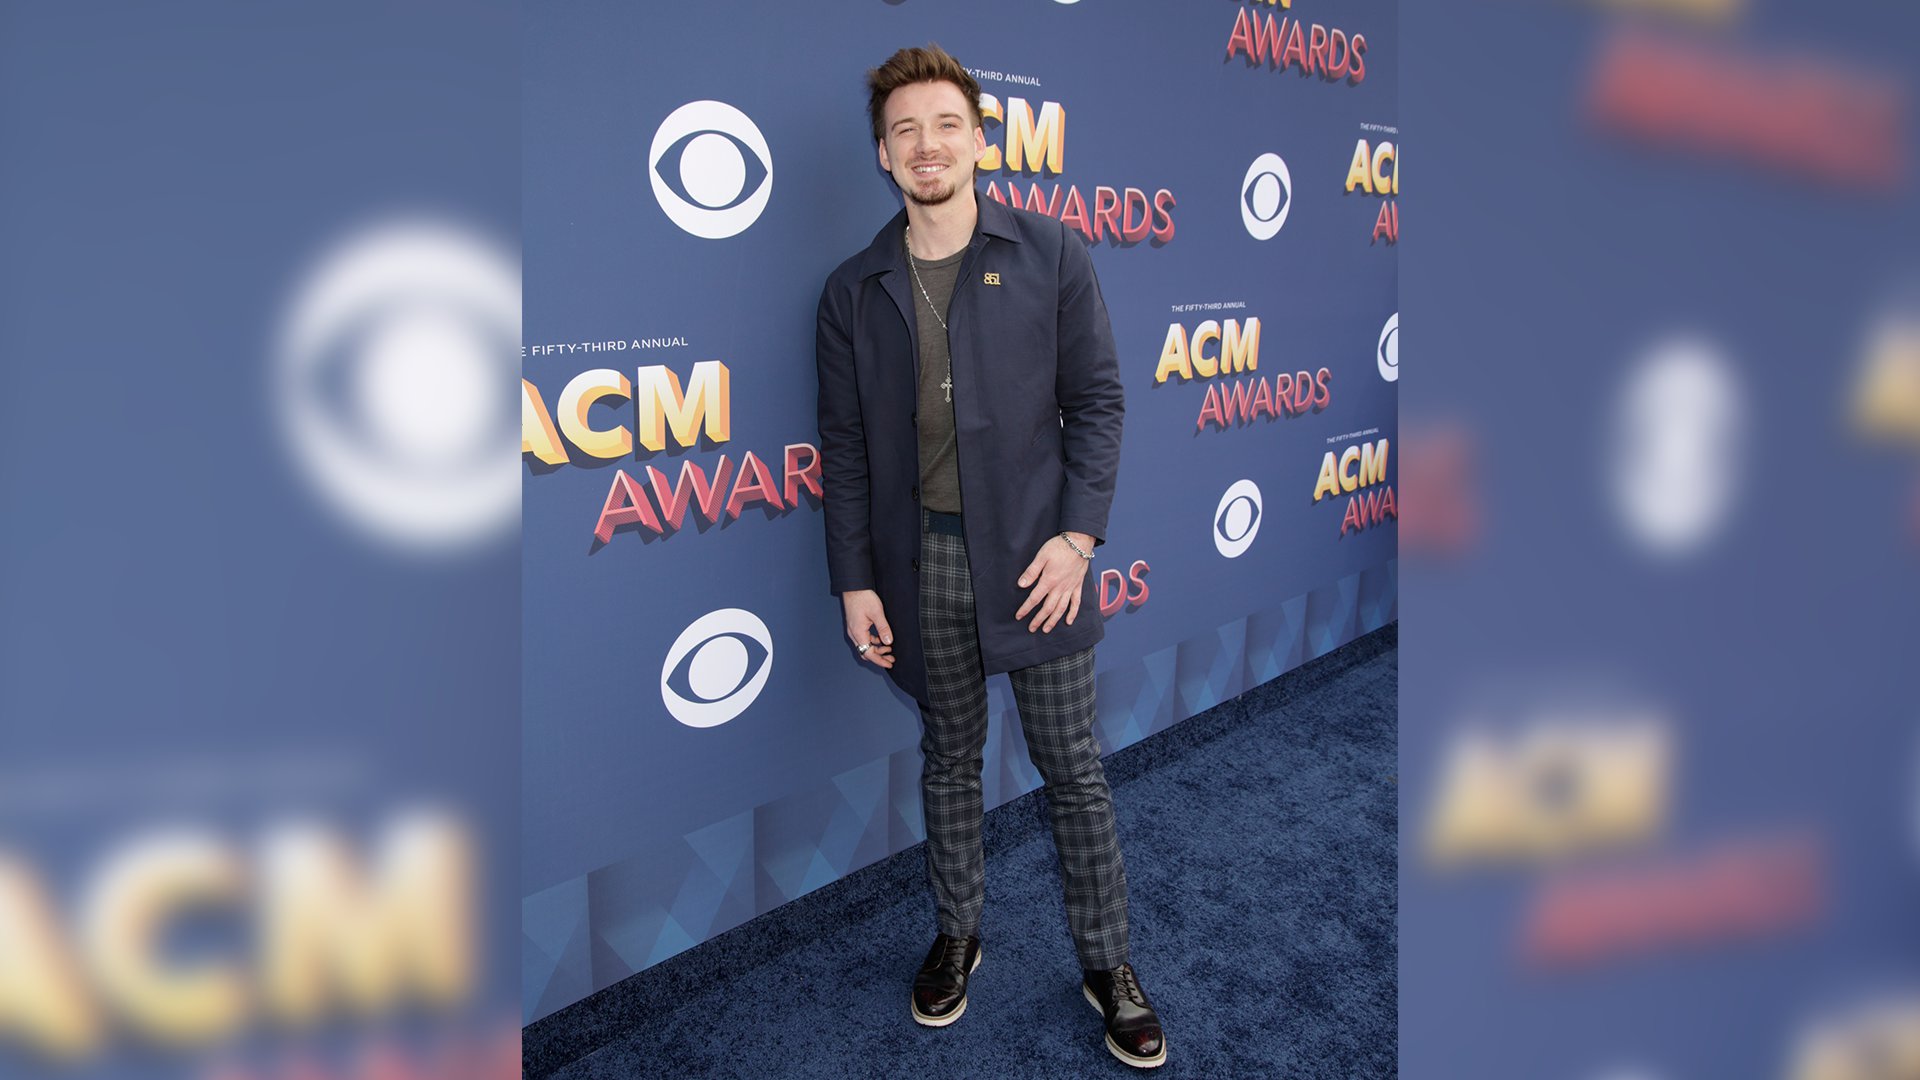 Morgan Wallen is currently heating up the ACM red carpet and the charts with his new song 